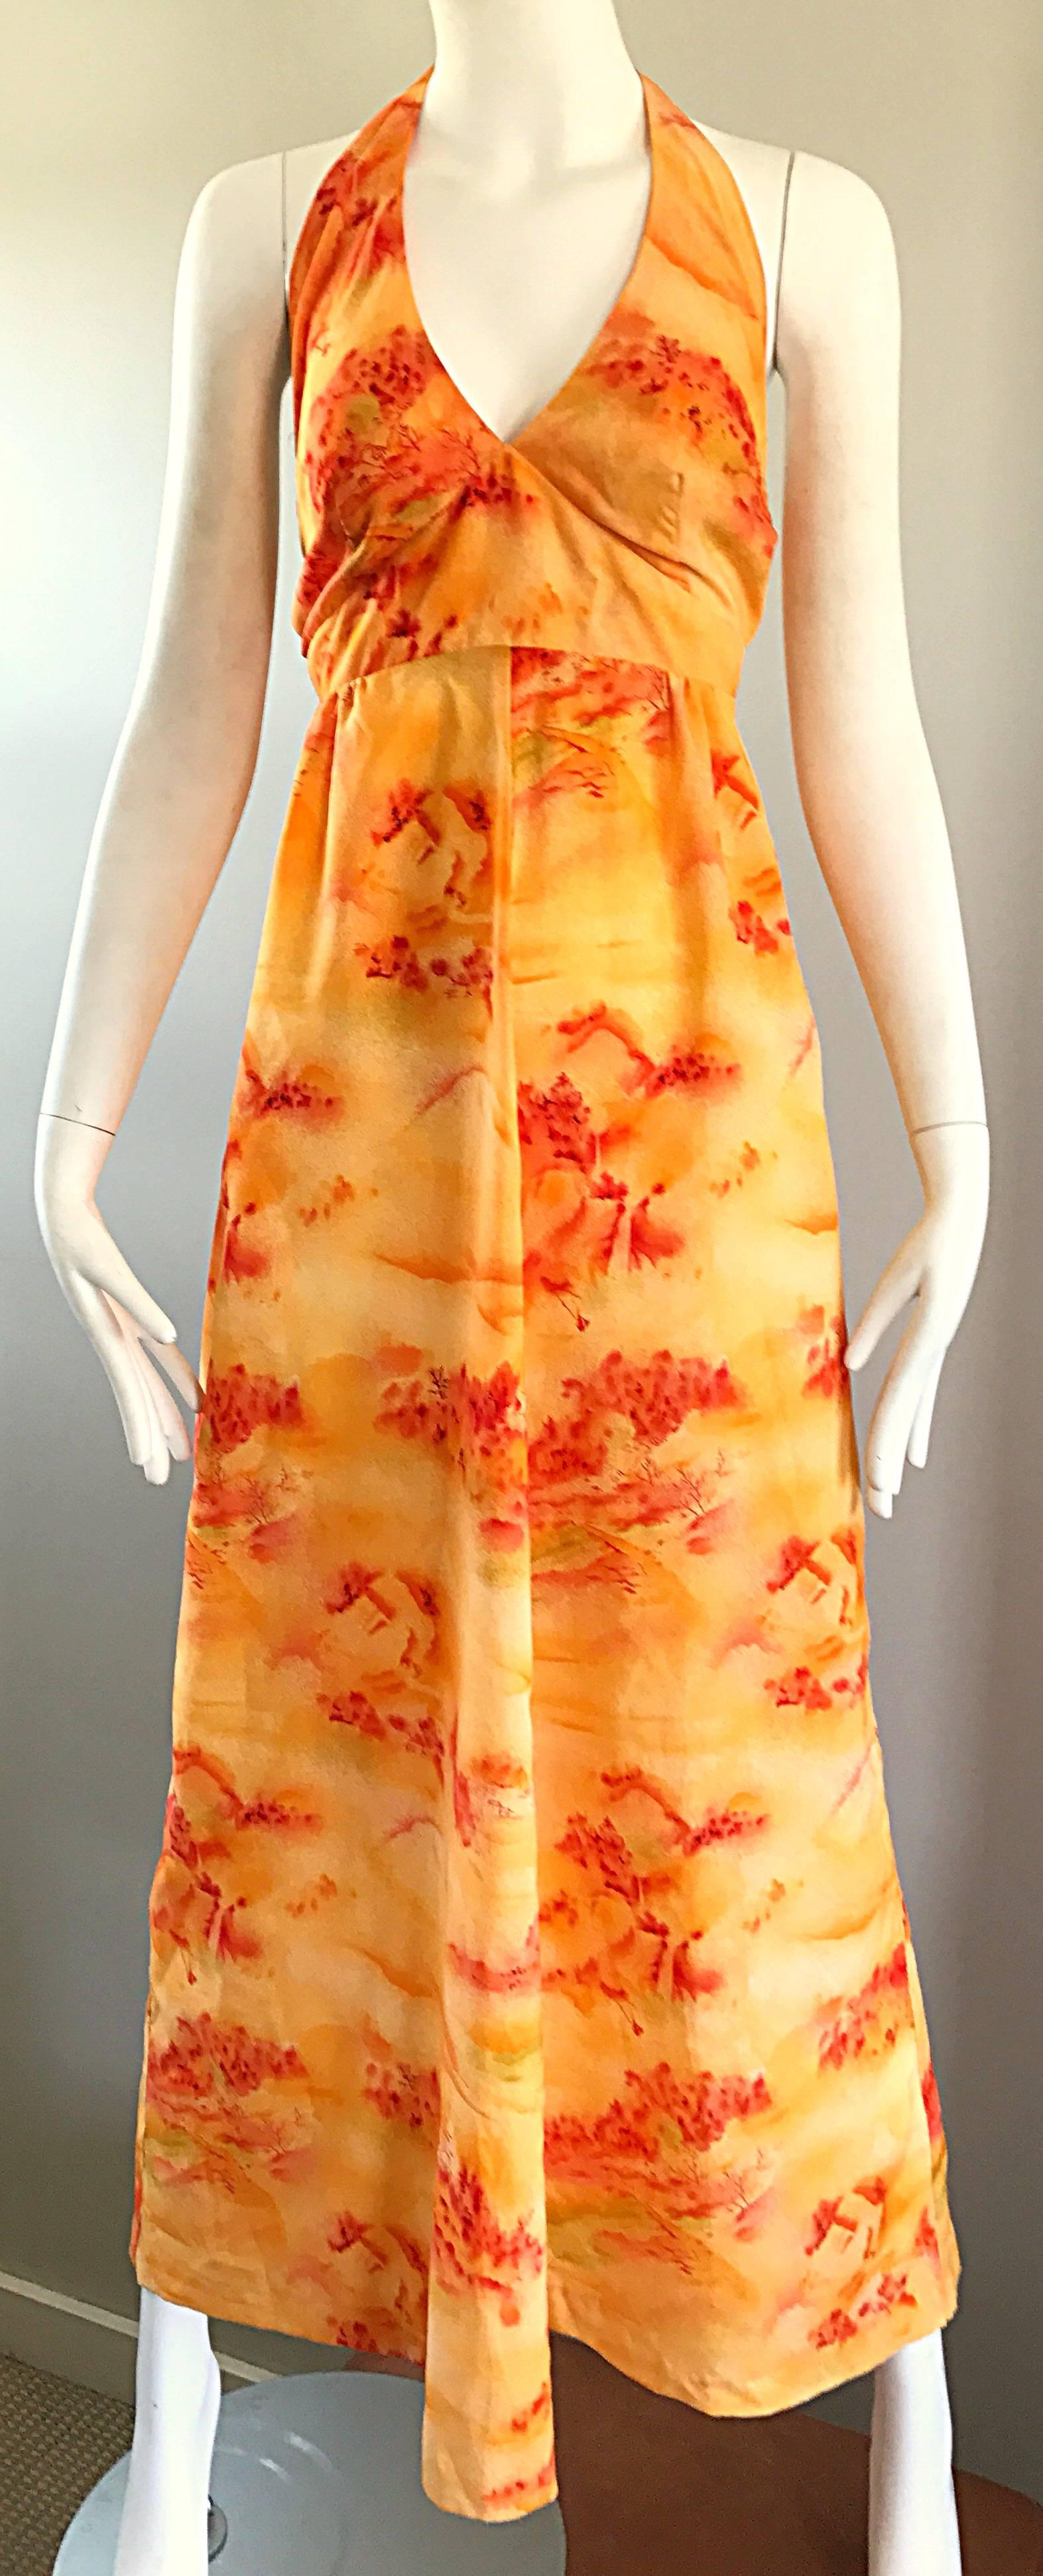 Incredible 1970s Asian Themed Bright Orange Vintage 70s Novelty Maxi Dress  In Excellent Condition For Sale In San Diego, CA